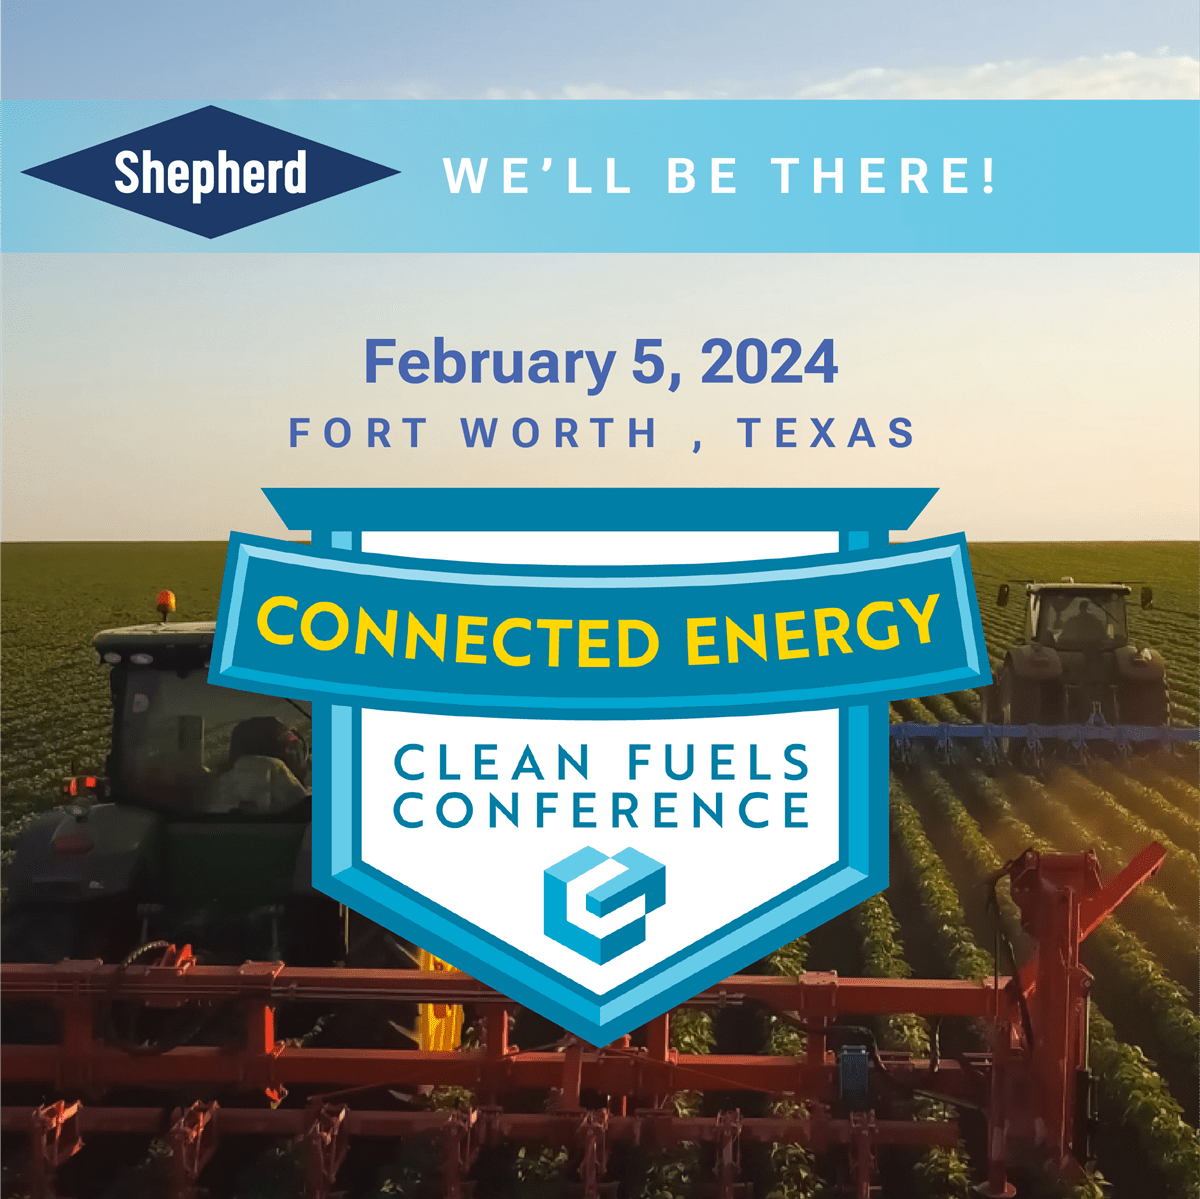 This Week in Fort Worth: Shepherd Chemical Attends the Clean Fuels Conference